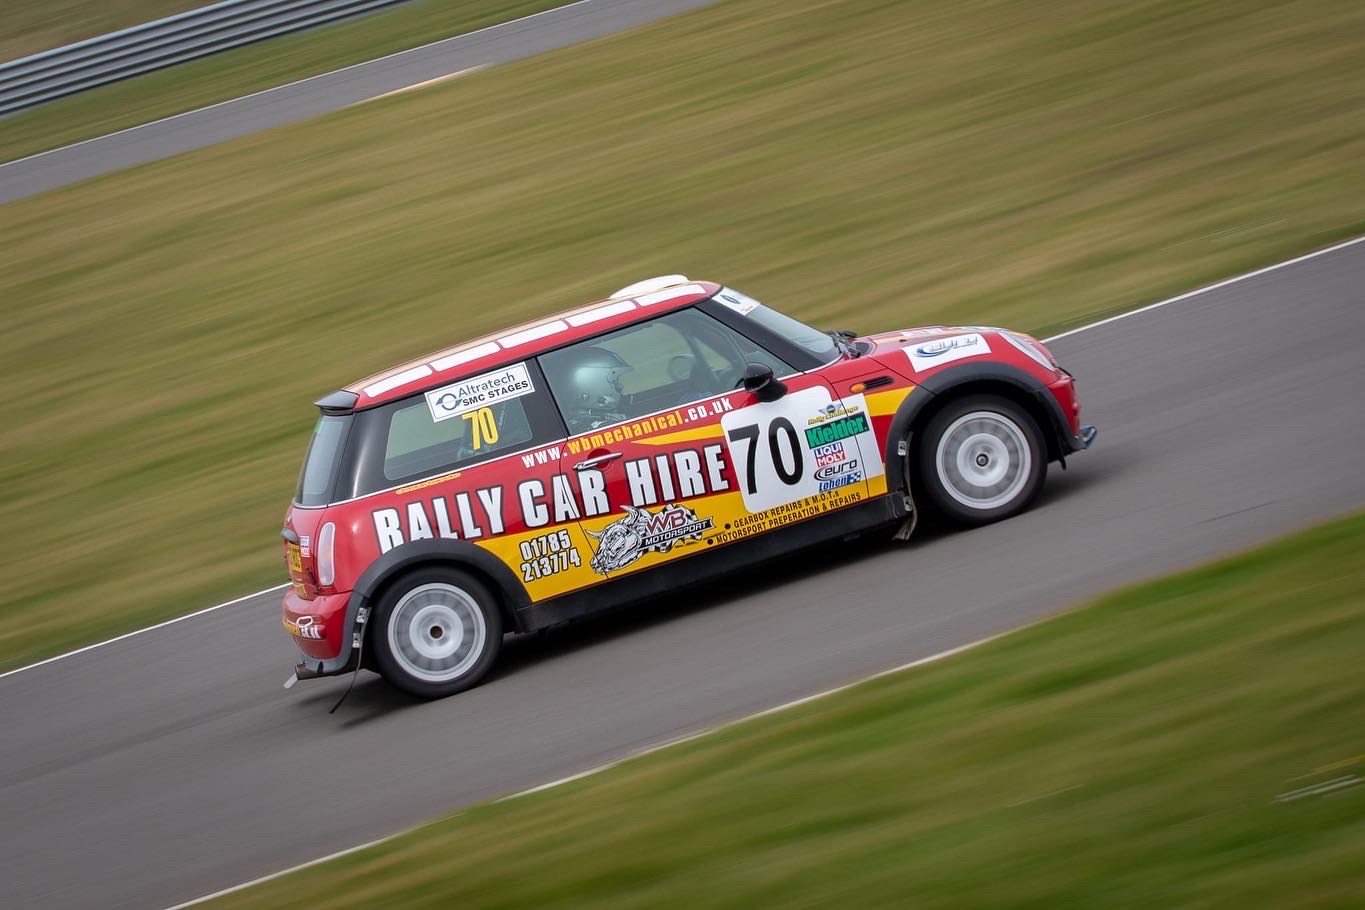 a mini rally car driving at high speed on track